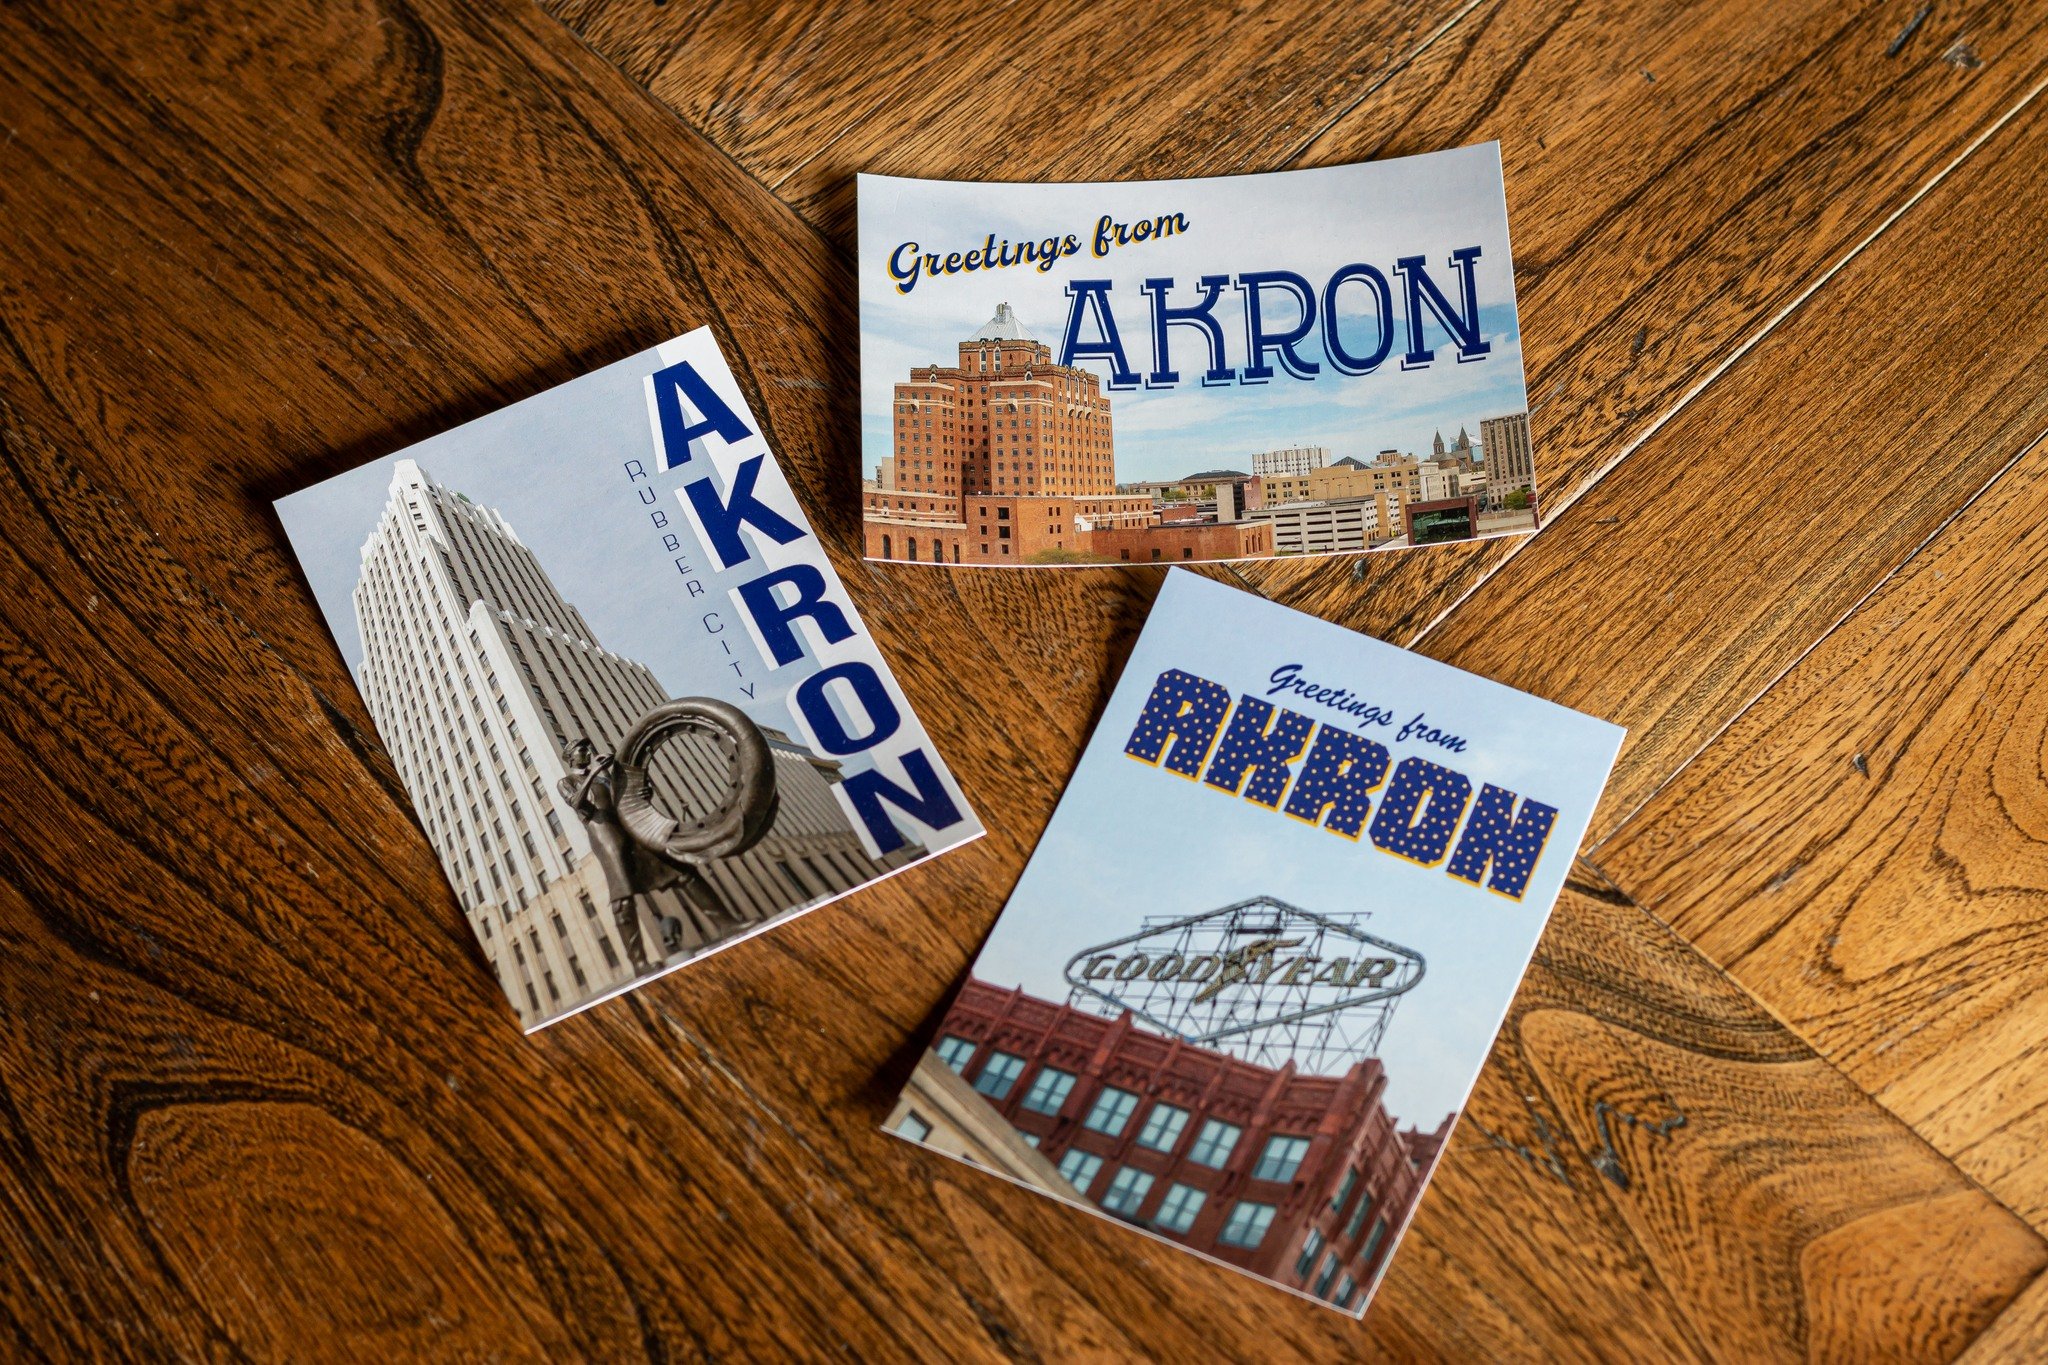 Whether you're looking for something to send to your out-of-town friends or you are from out of town and are looking for a keepsake from your travels, check out these awesome postcards!

Featuring beautiful photos from Ashley Brichetto Photography, t